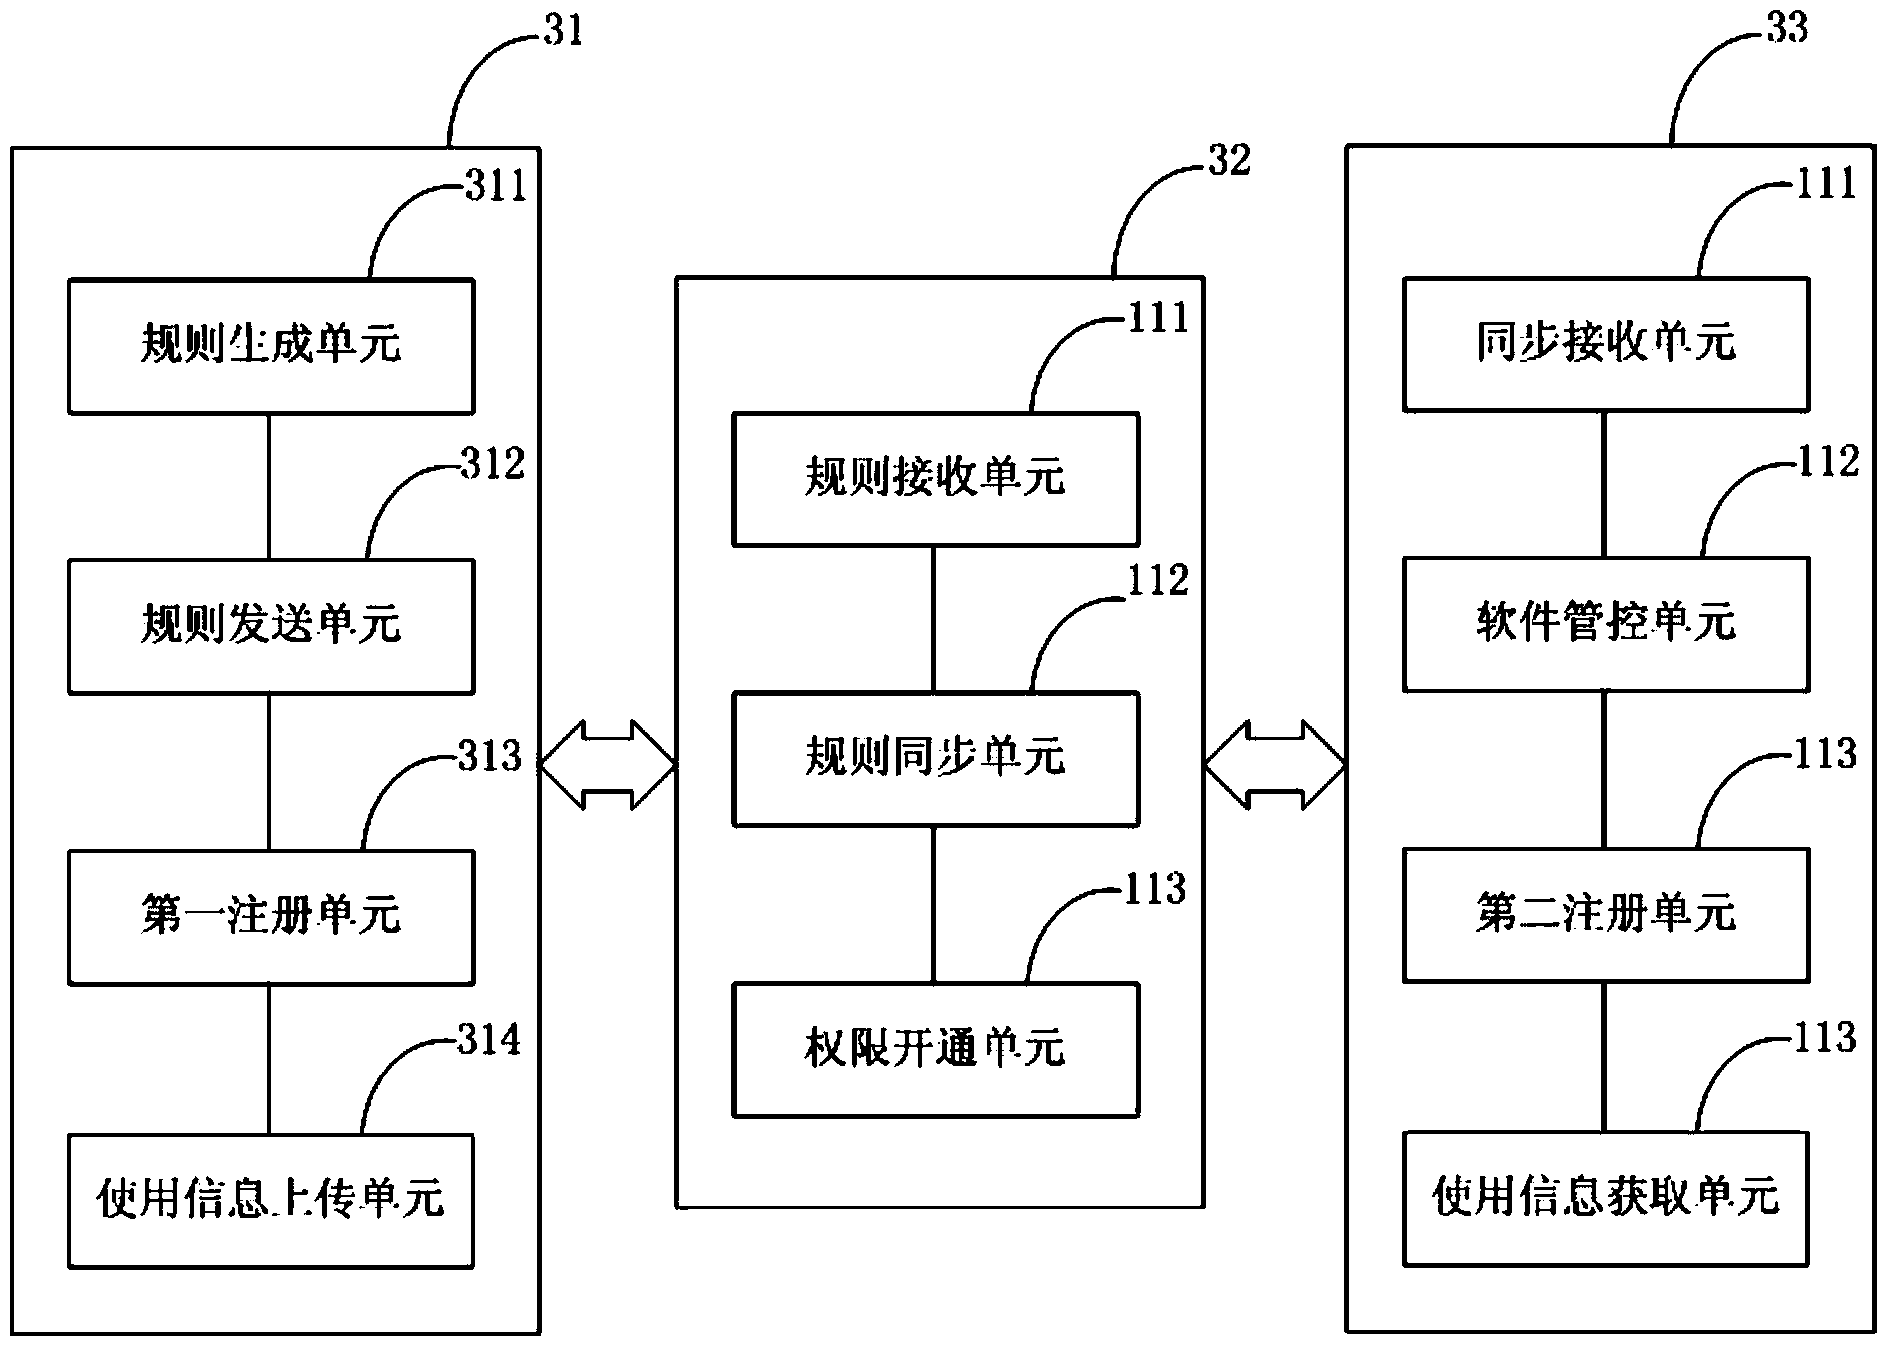 Method and system for remotely controlling application software of mobile terminal